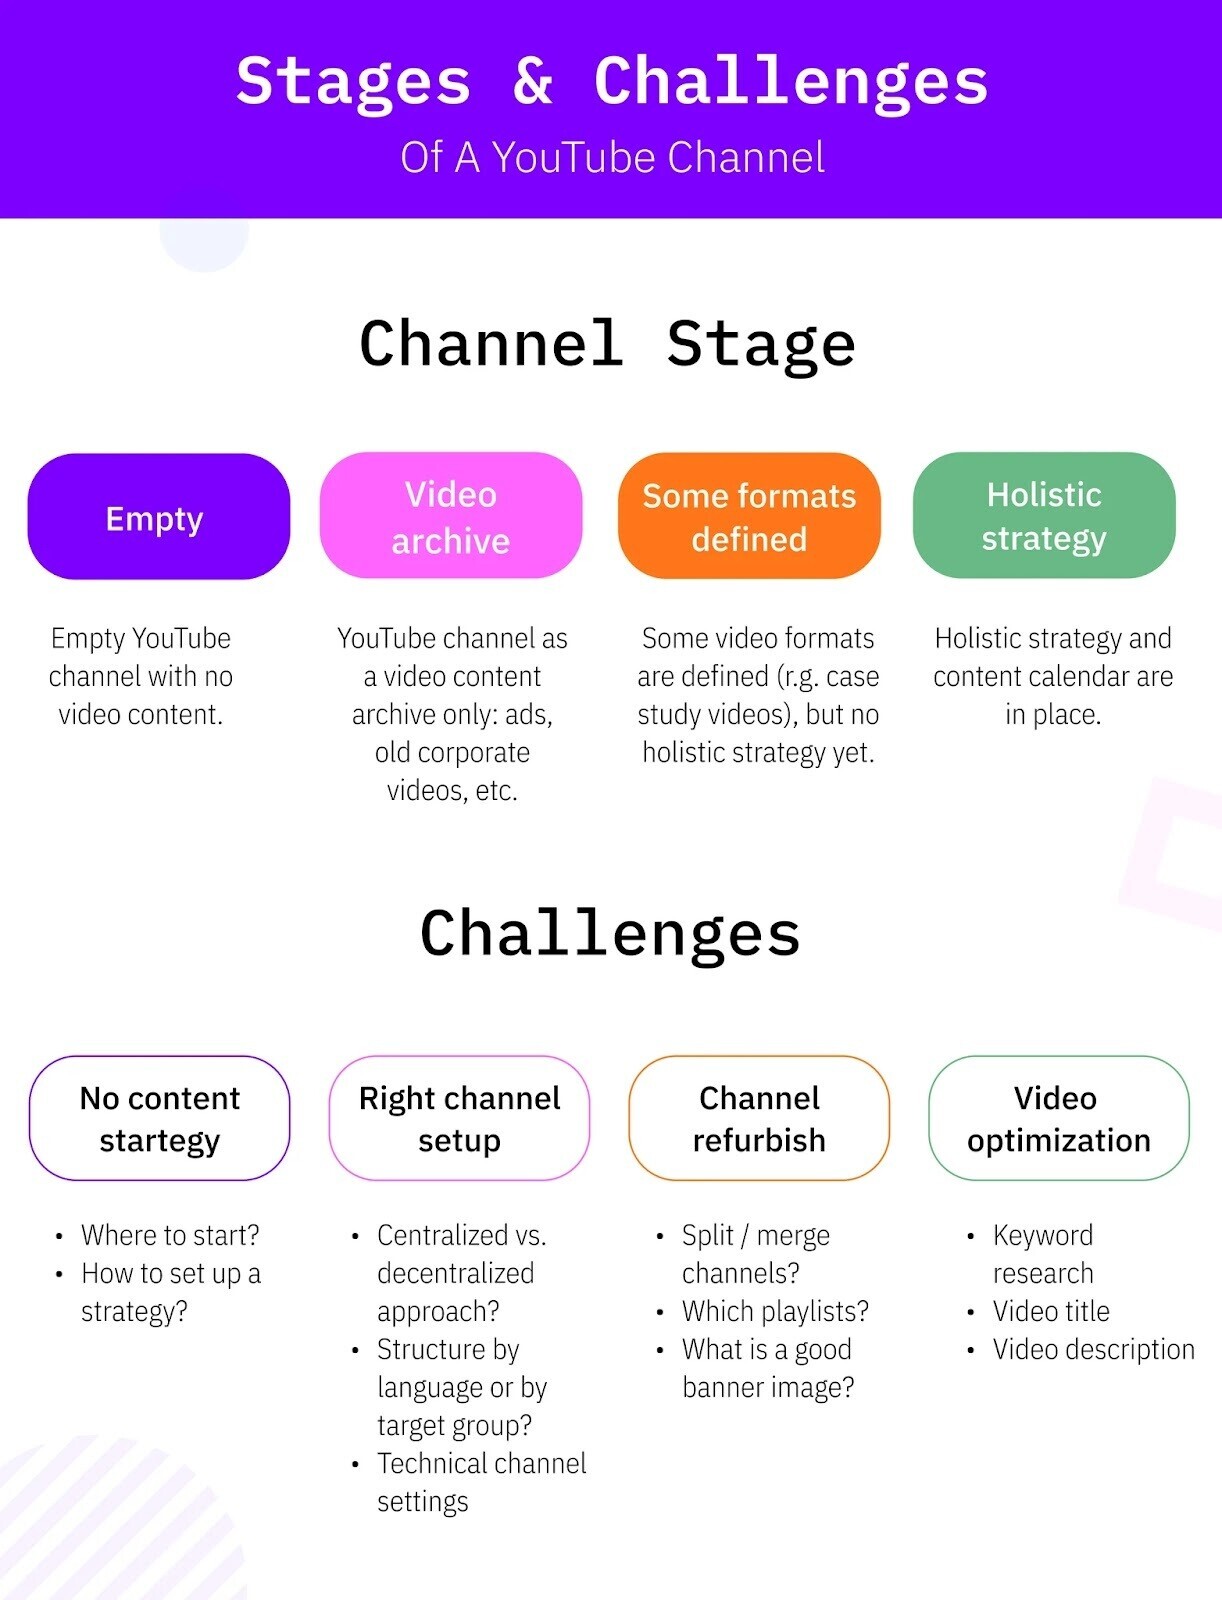 "Stages & Challenges of a YouTube Channel" infographic